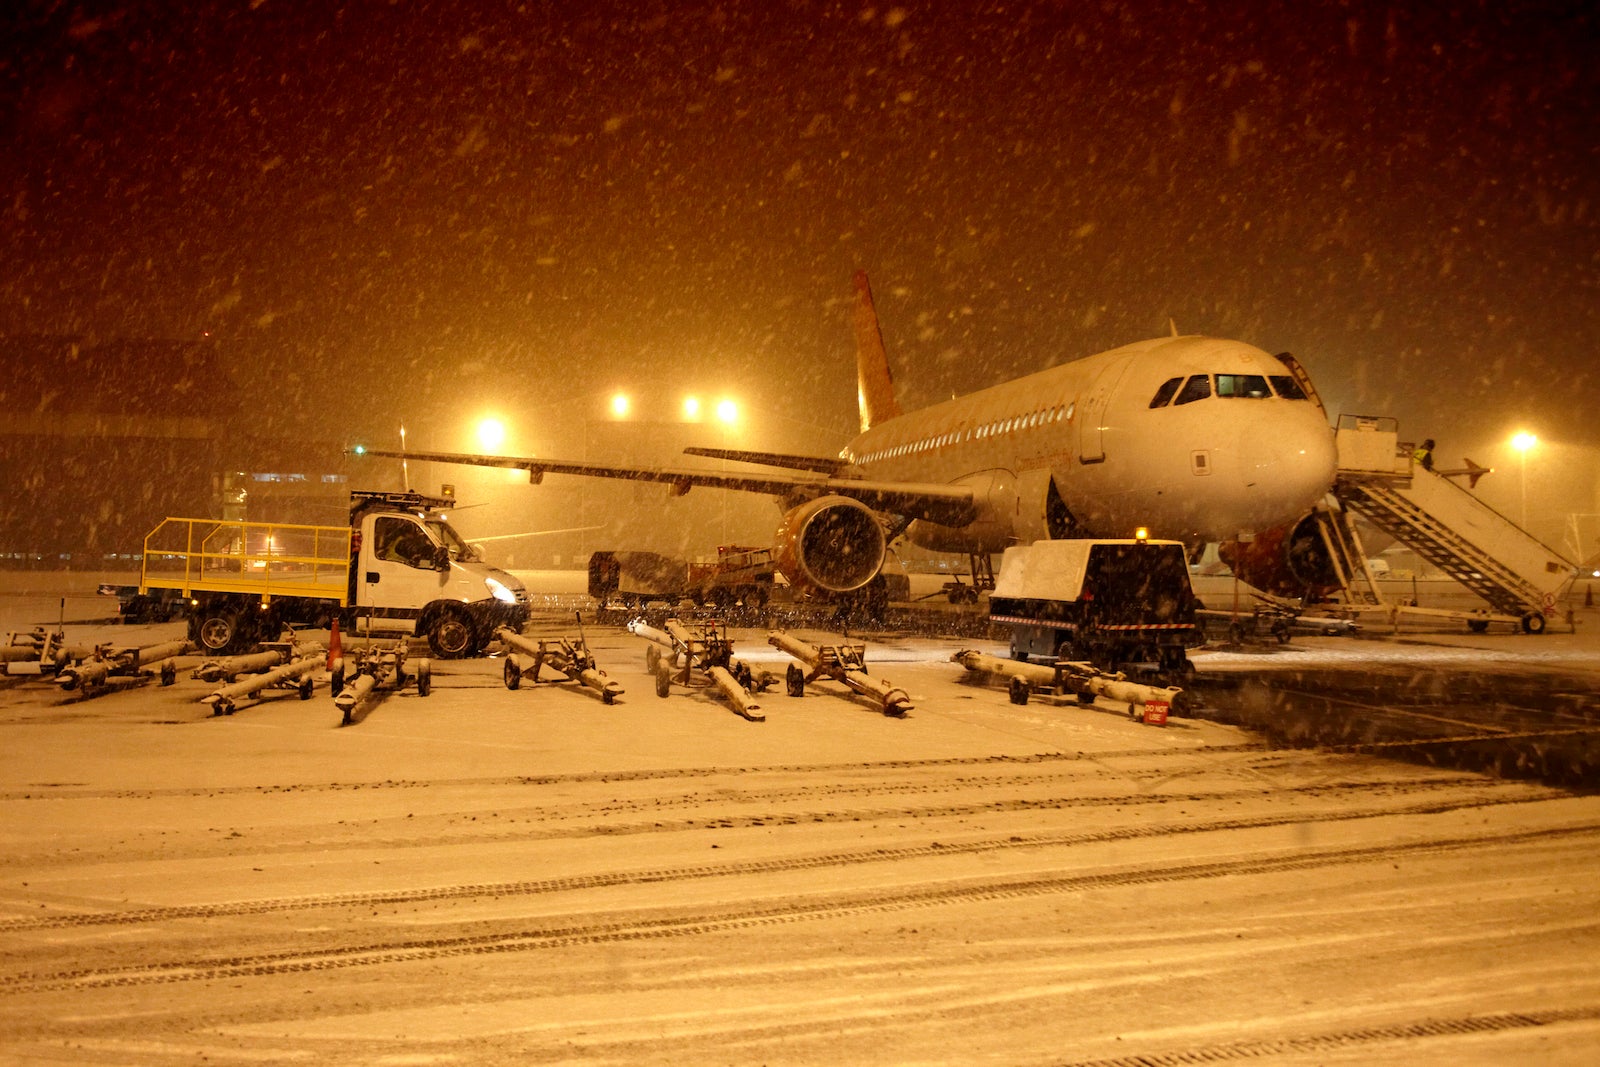 Plane in snow at an airport